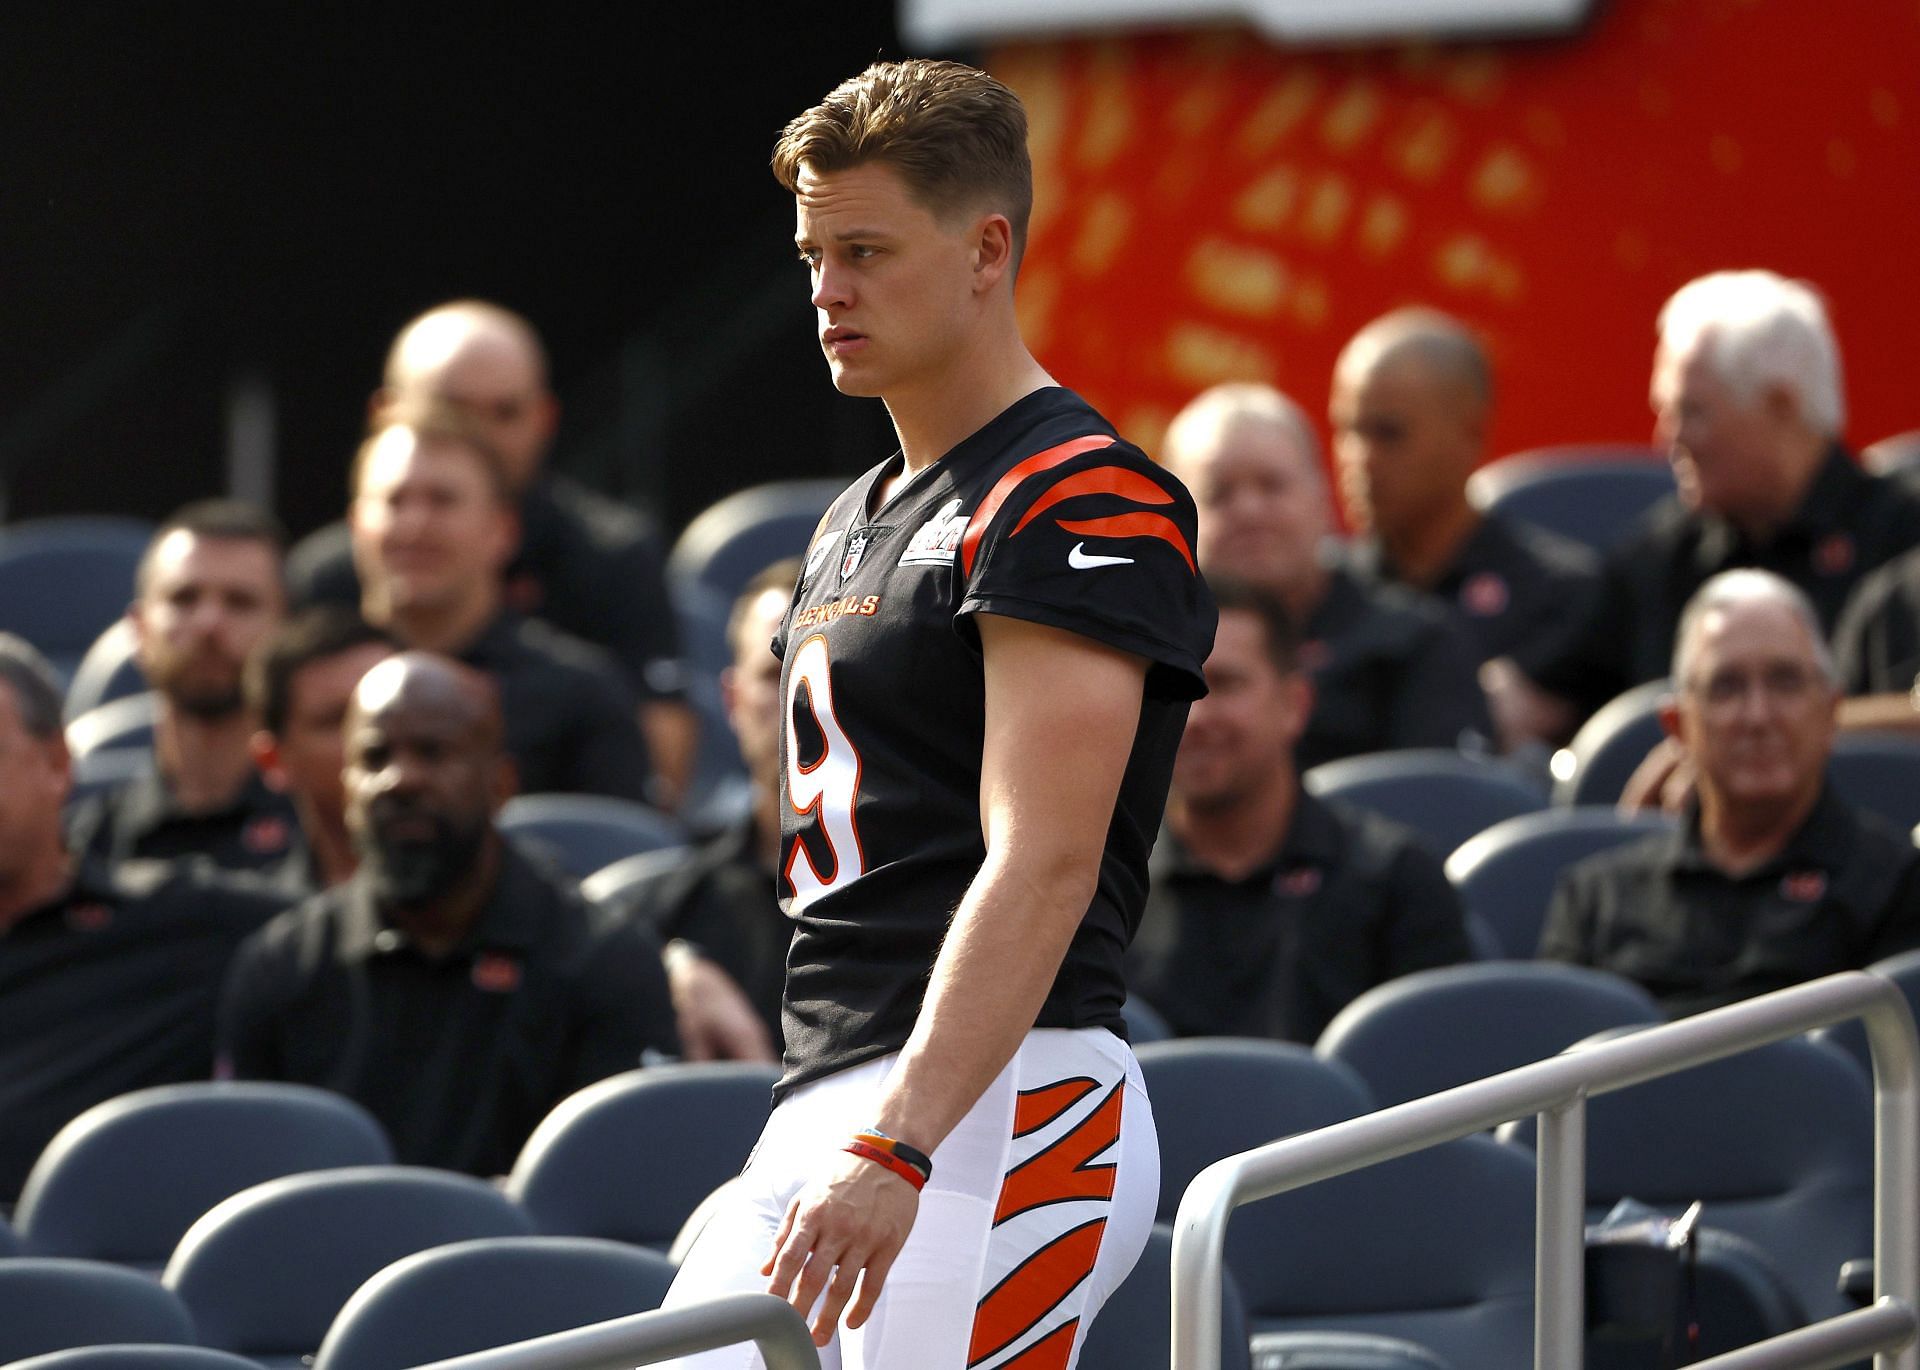 Joe Burrow made the Super Bowl just two seasons after being selected in the NFL Draft.